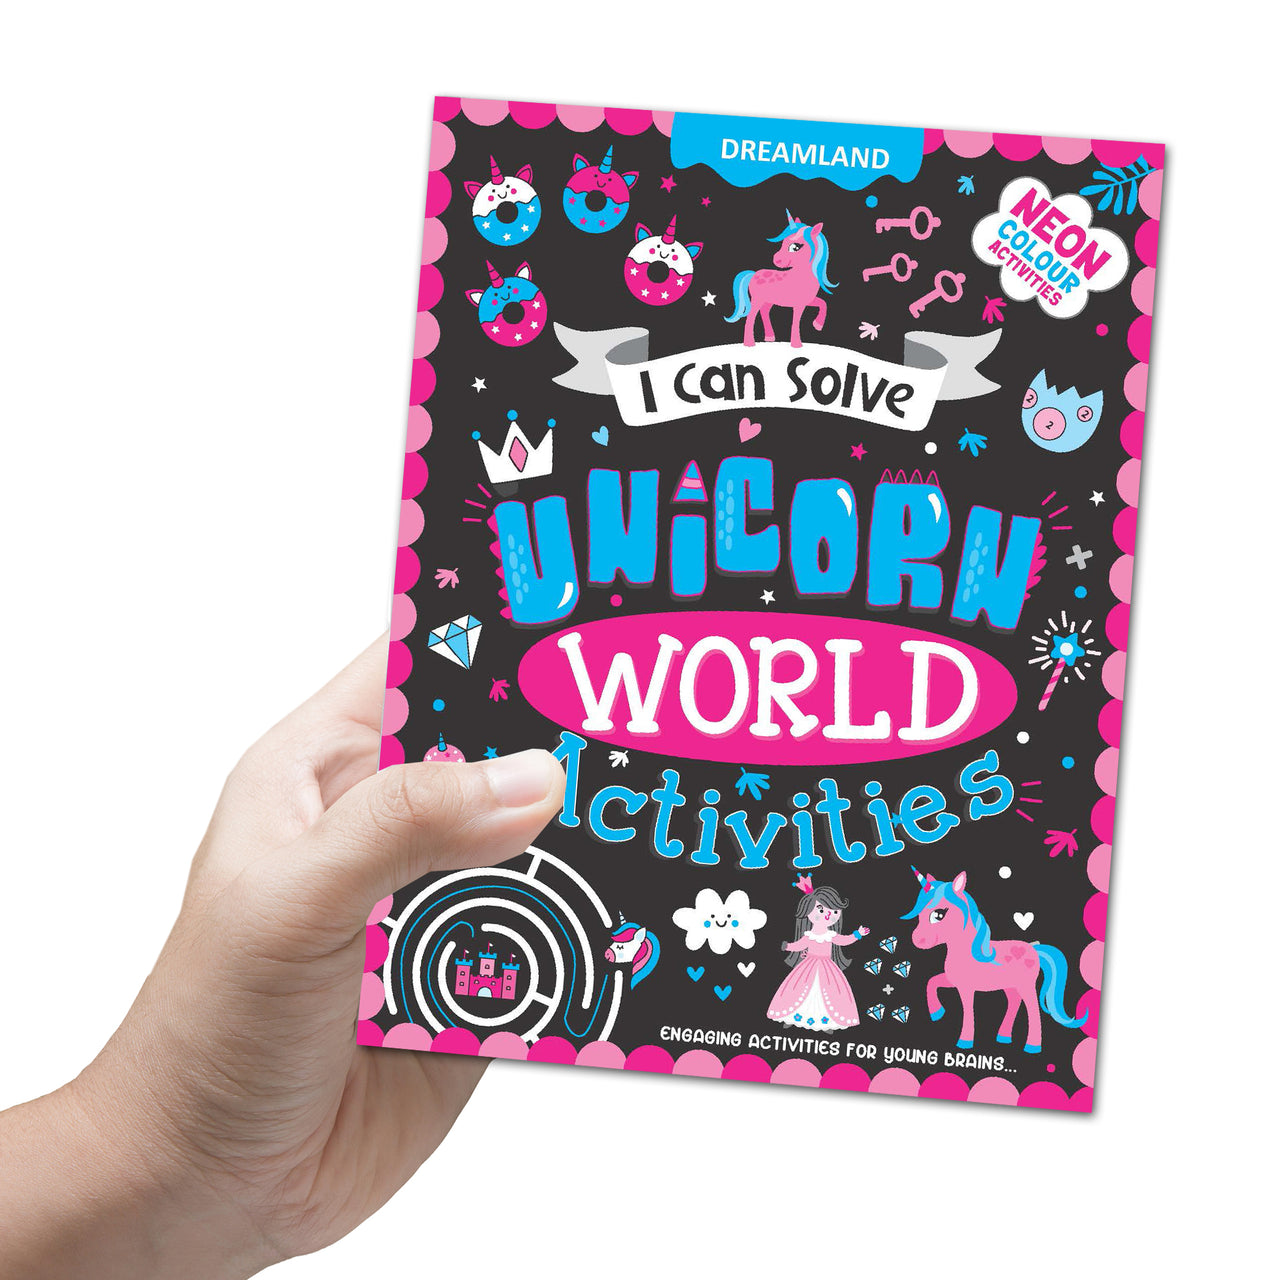 Dreamland Publications Unicorn World Activities - I Can Solve Activity Book for Kids Age 4- 8 Years | With Colouring Pages, Mazes, Dot-to-Dots - Distacart